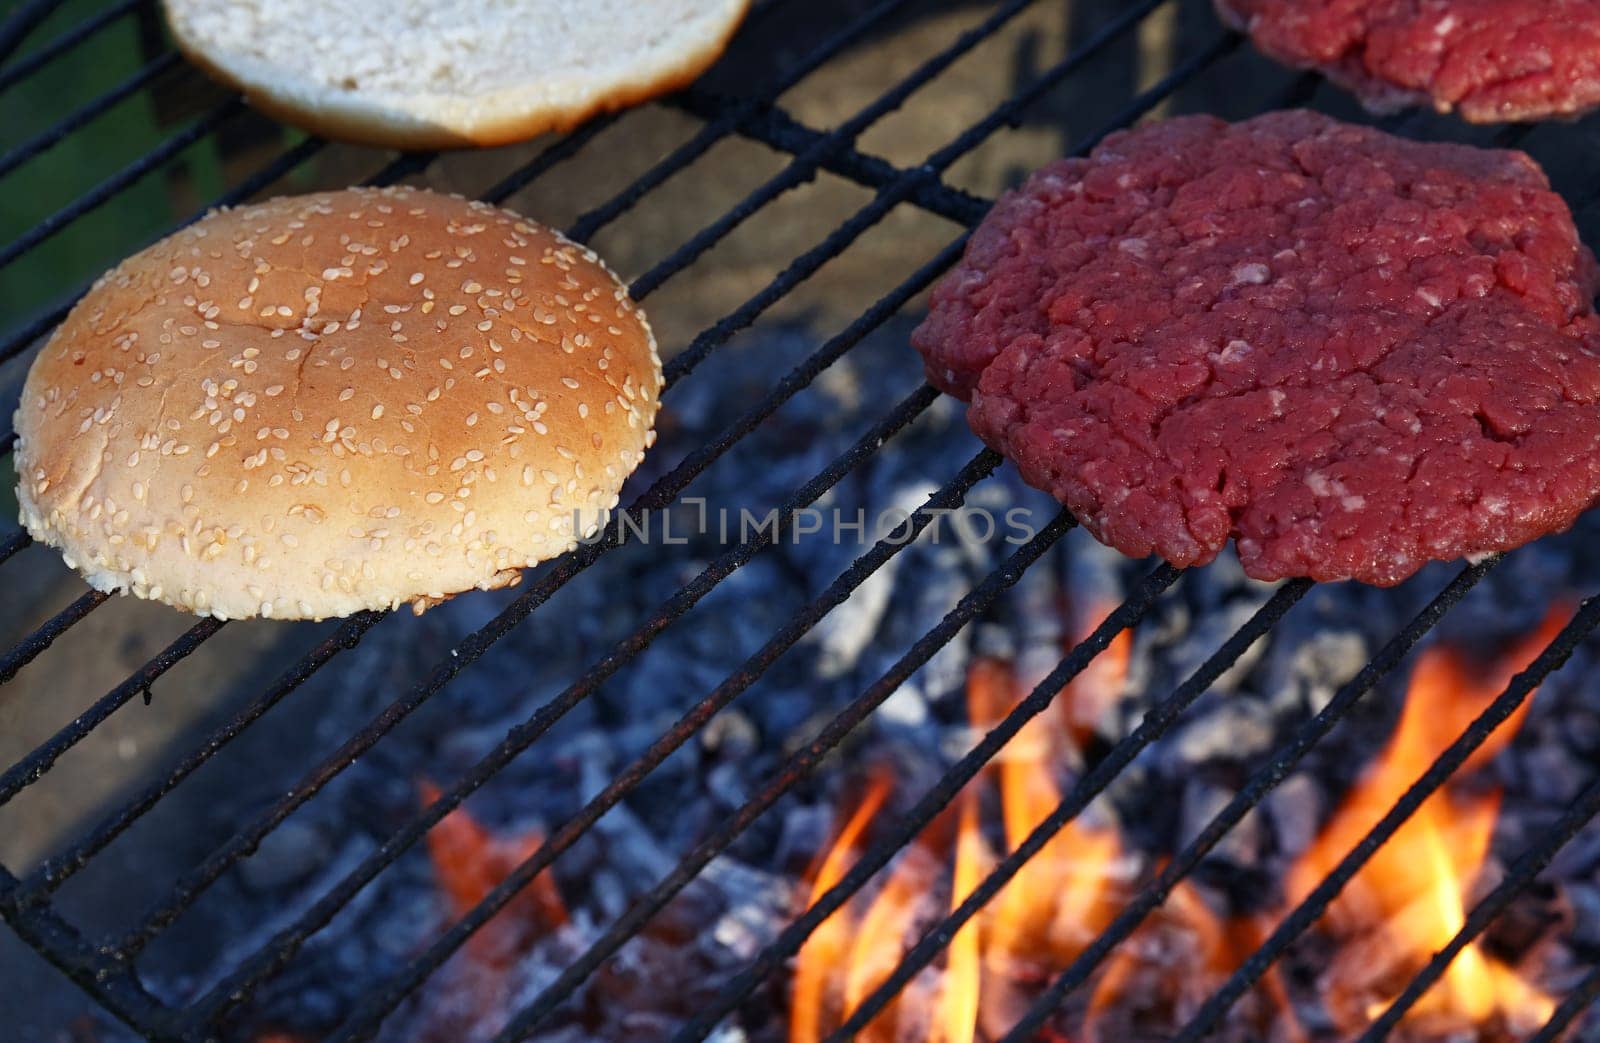 Meat burgers and buns for hamburger on fire grill by BreakingTheWalls